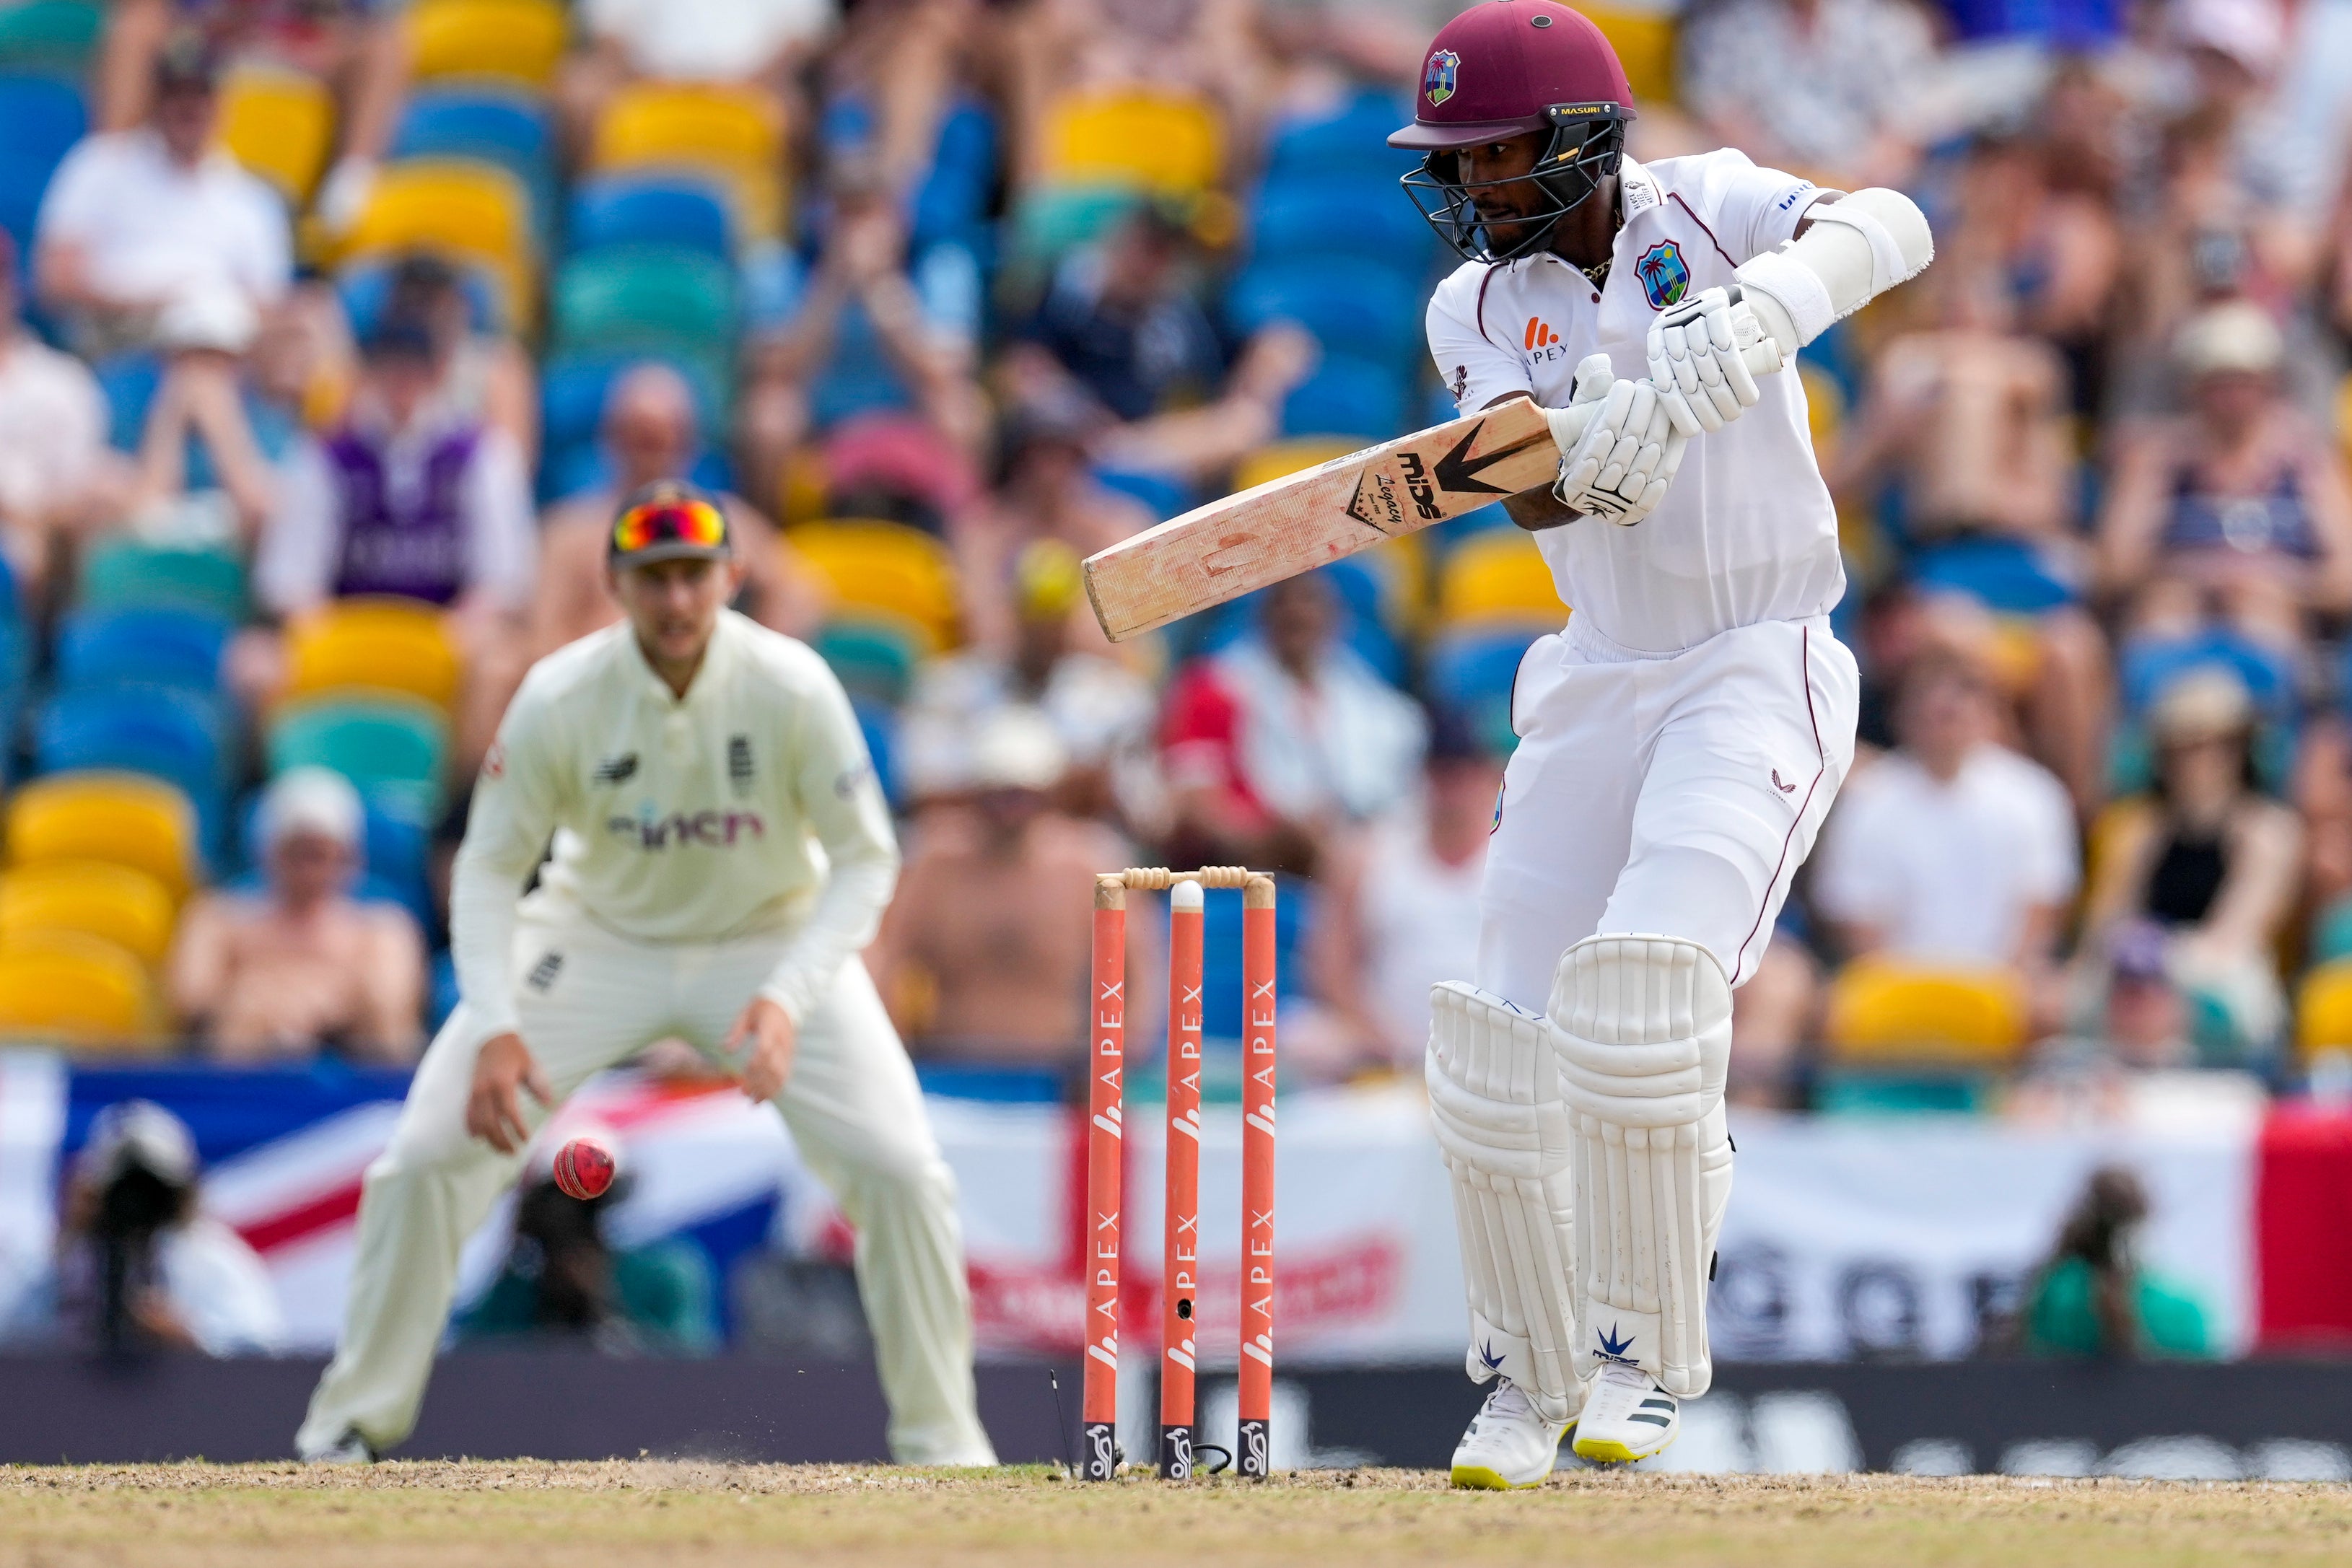 West Indies’ captain Kraigg Brathwaite kept England at bay to send the second Test heading for a draw